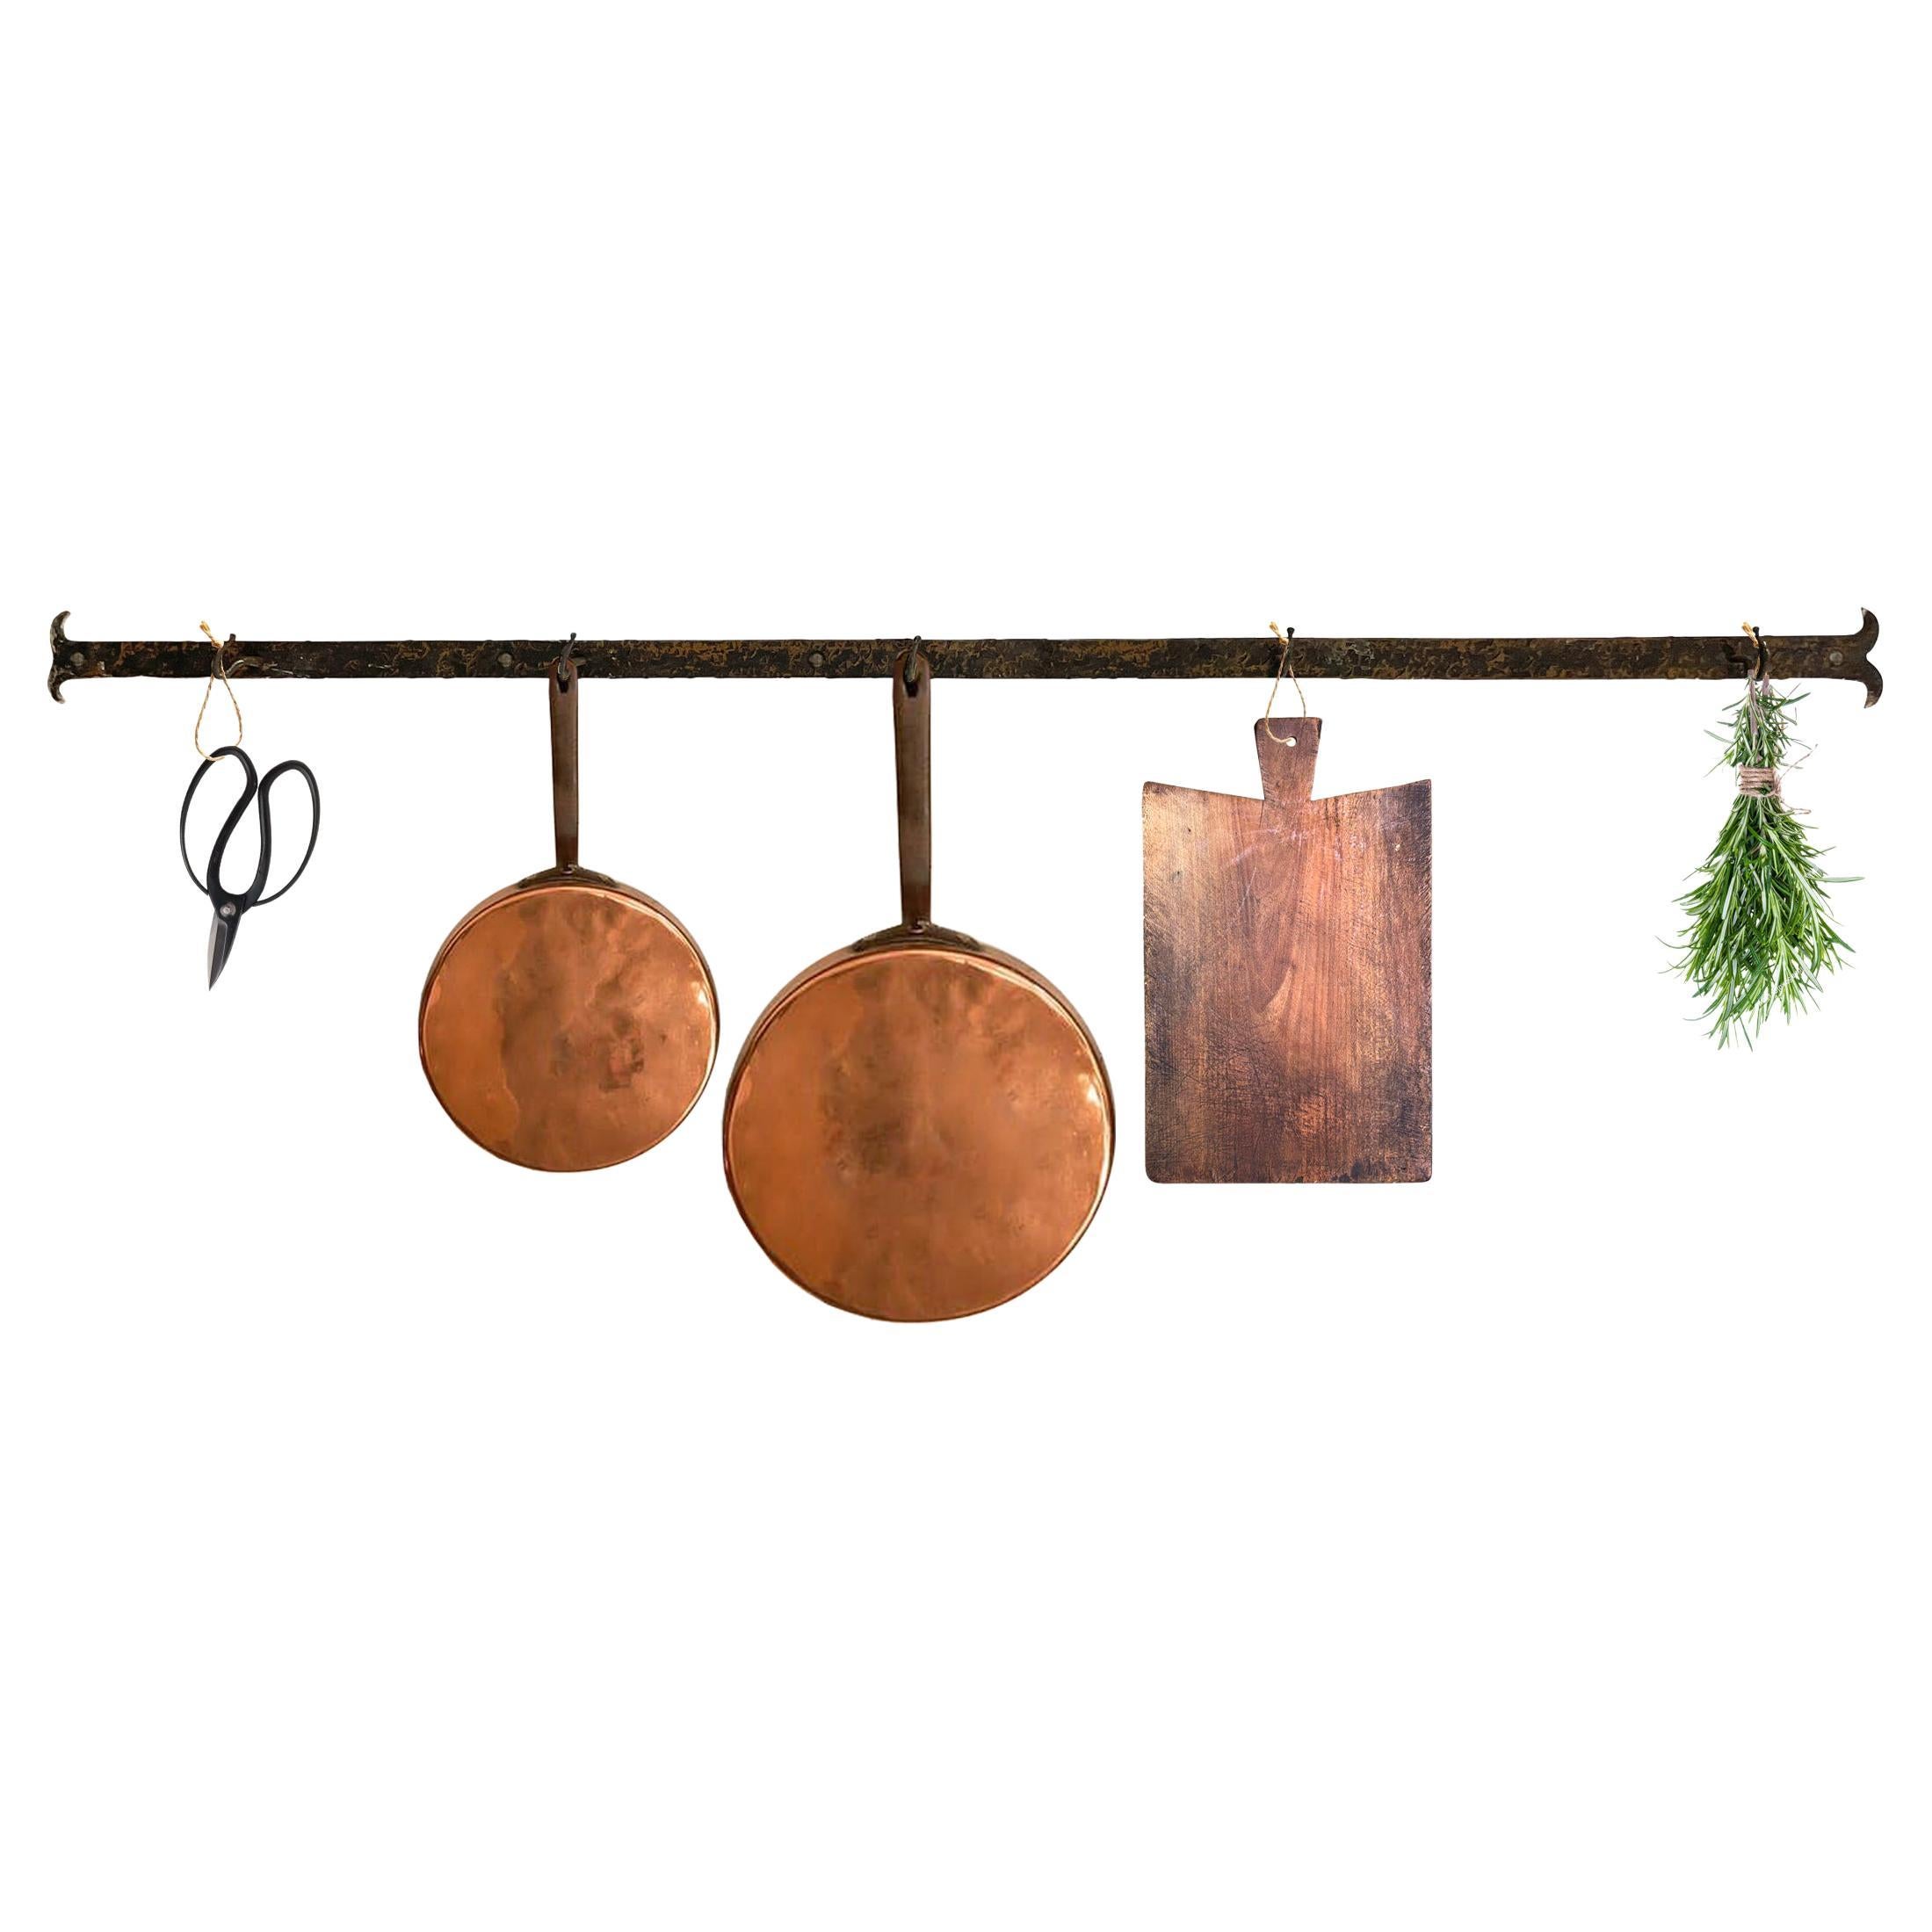 Early 20th Century French Wrought-Iron Wall-Mounted Pot Rack